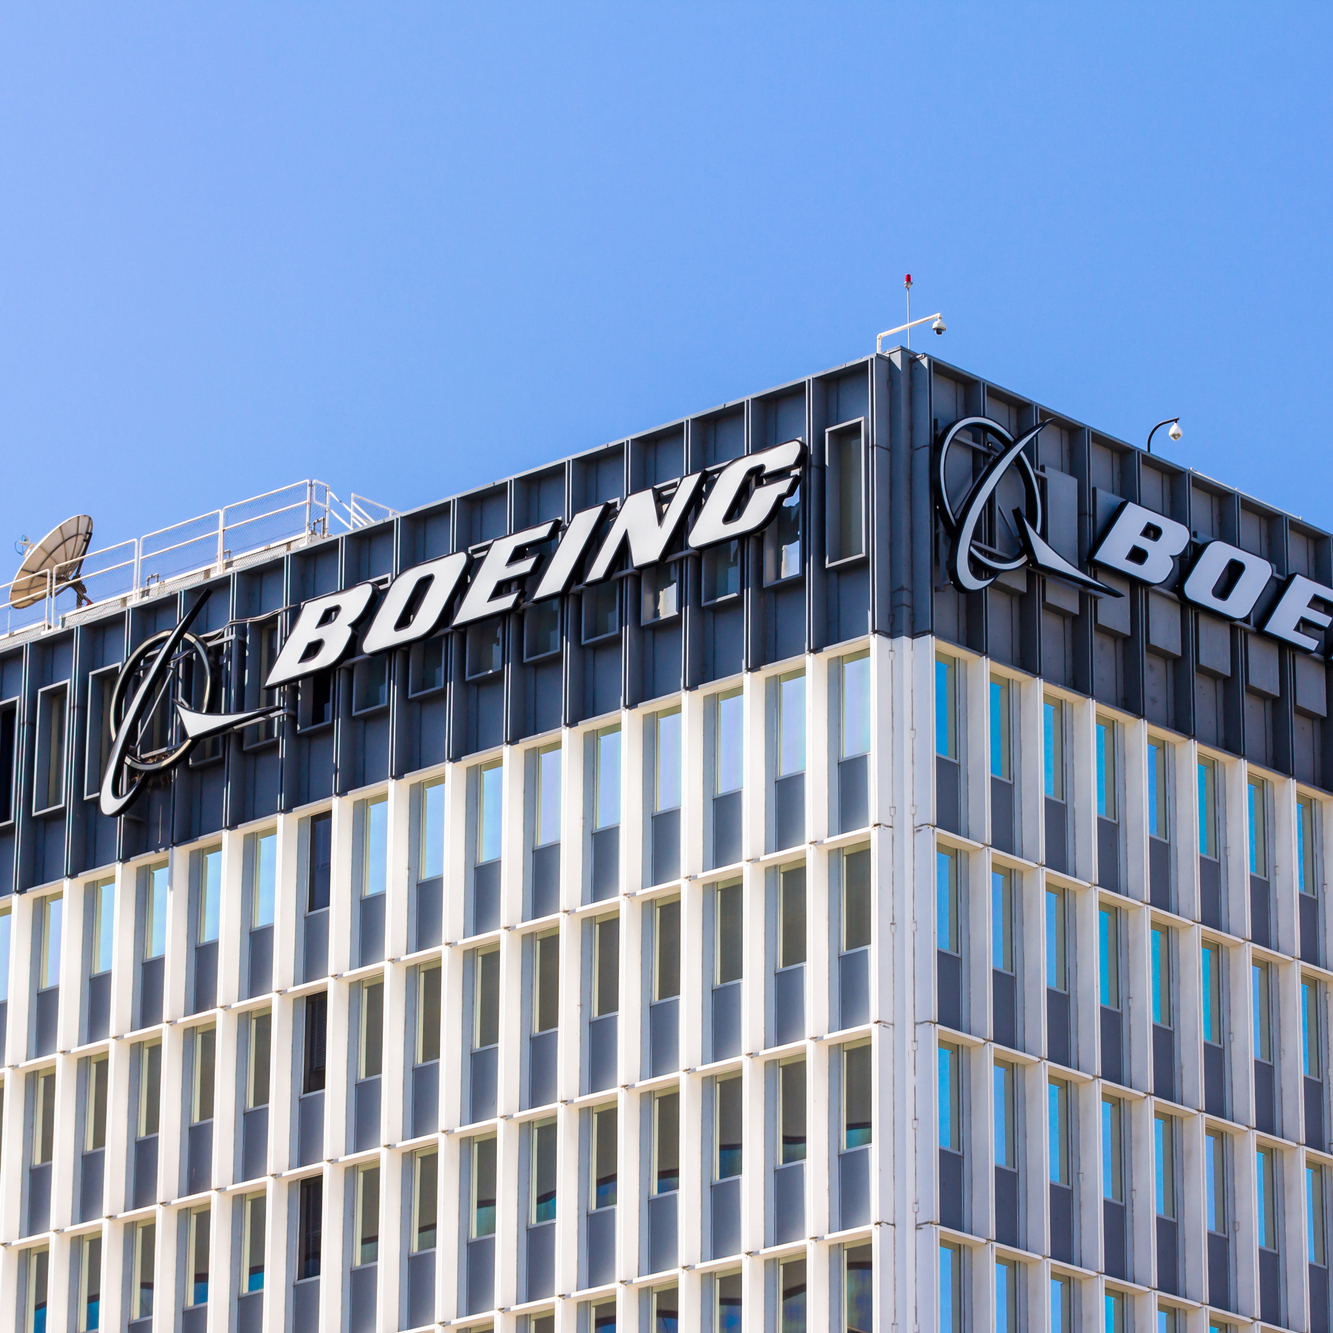 Boeing manufactuing facility